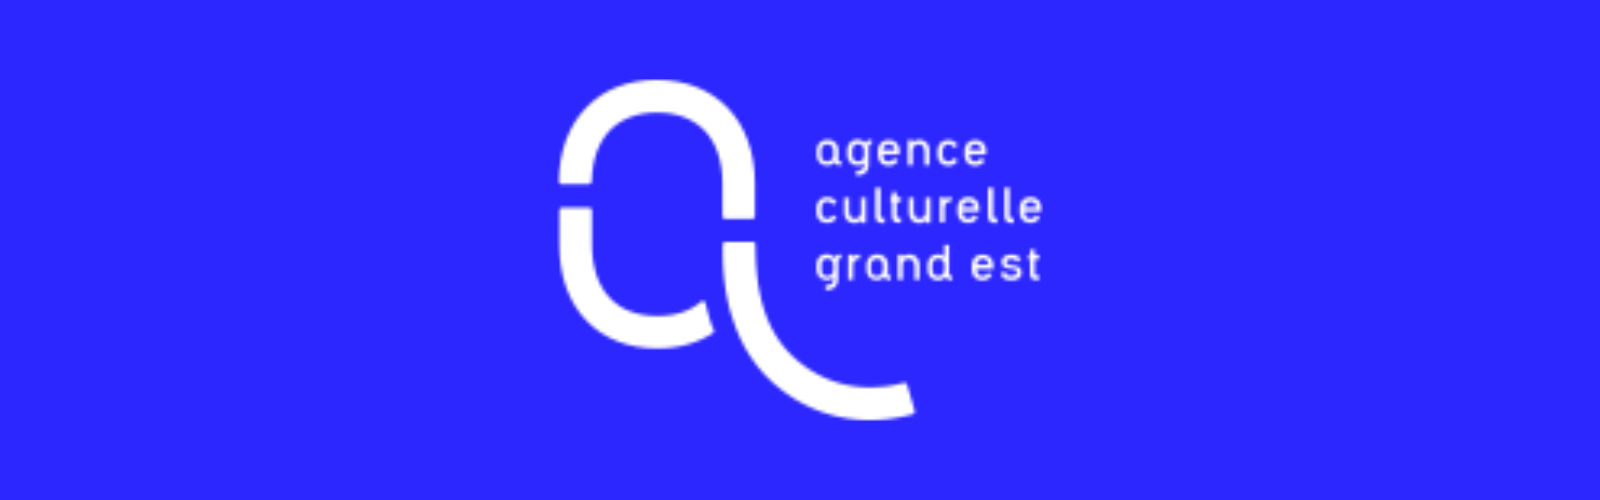 Training booking portal for the Agence culturelle Grand Est